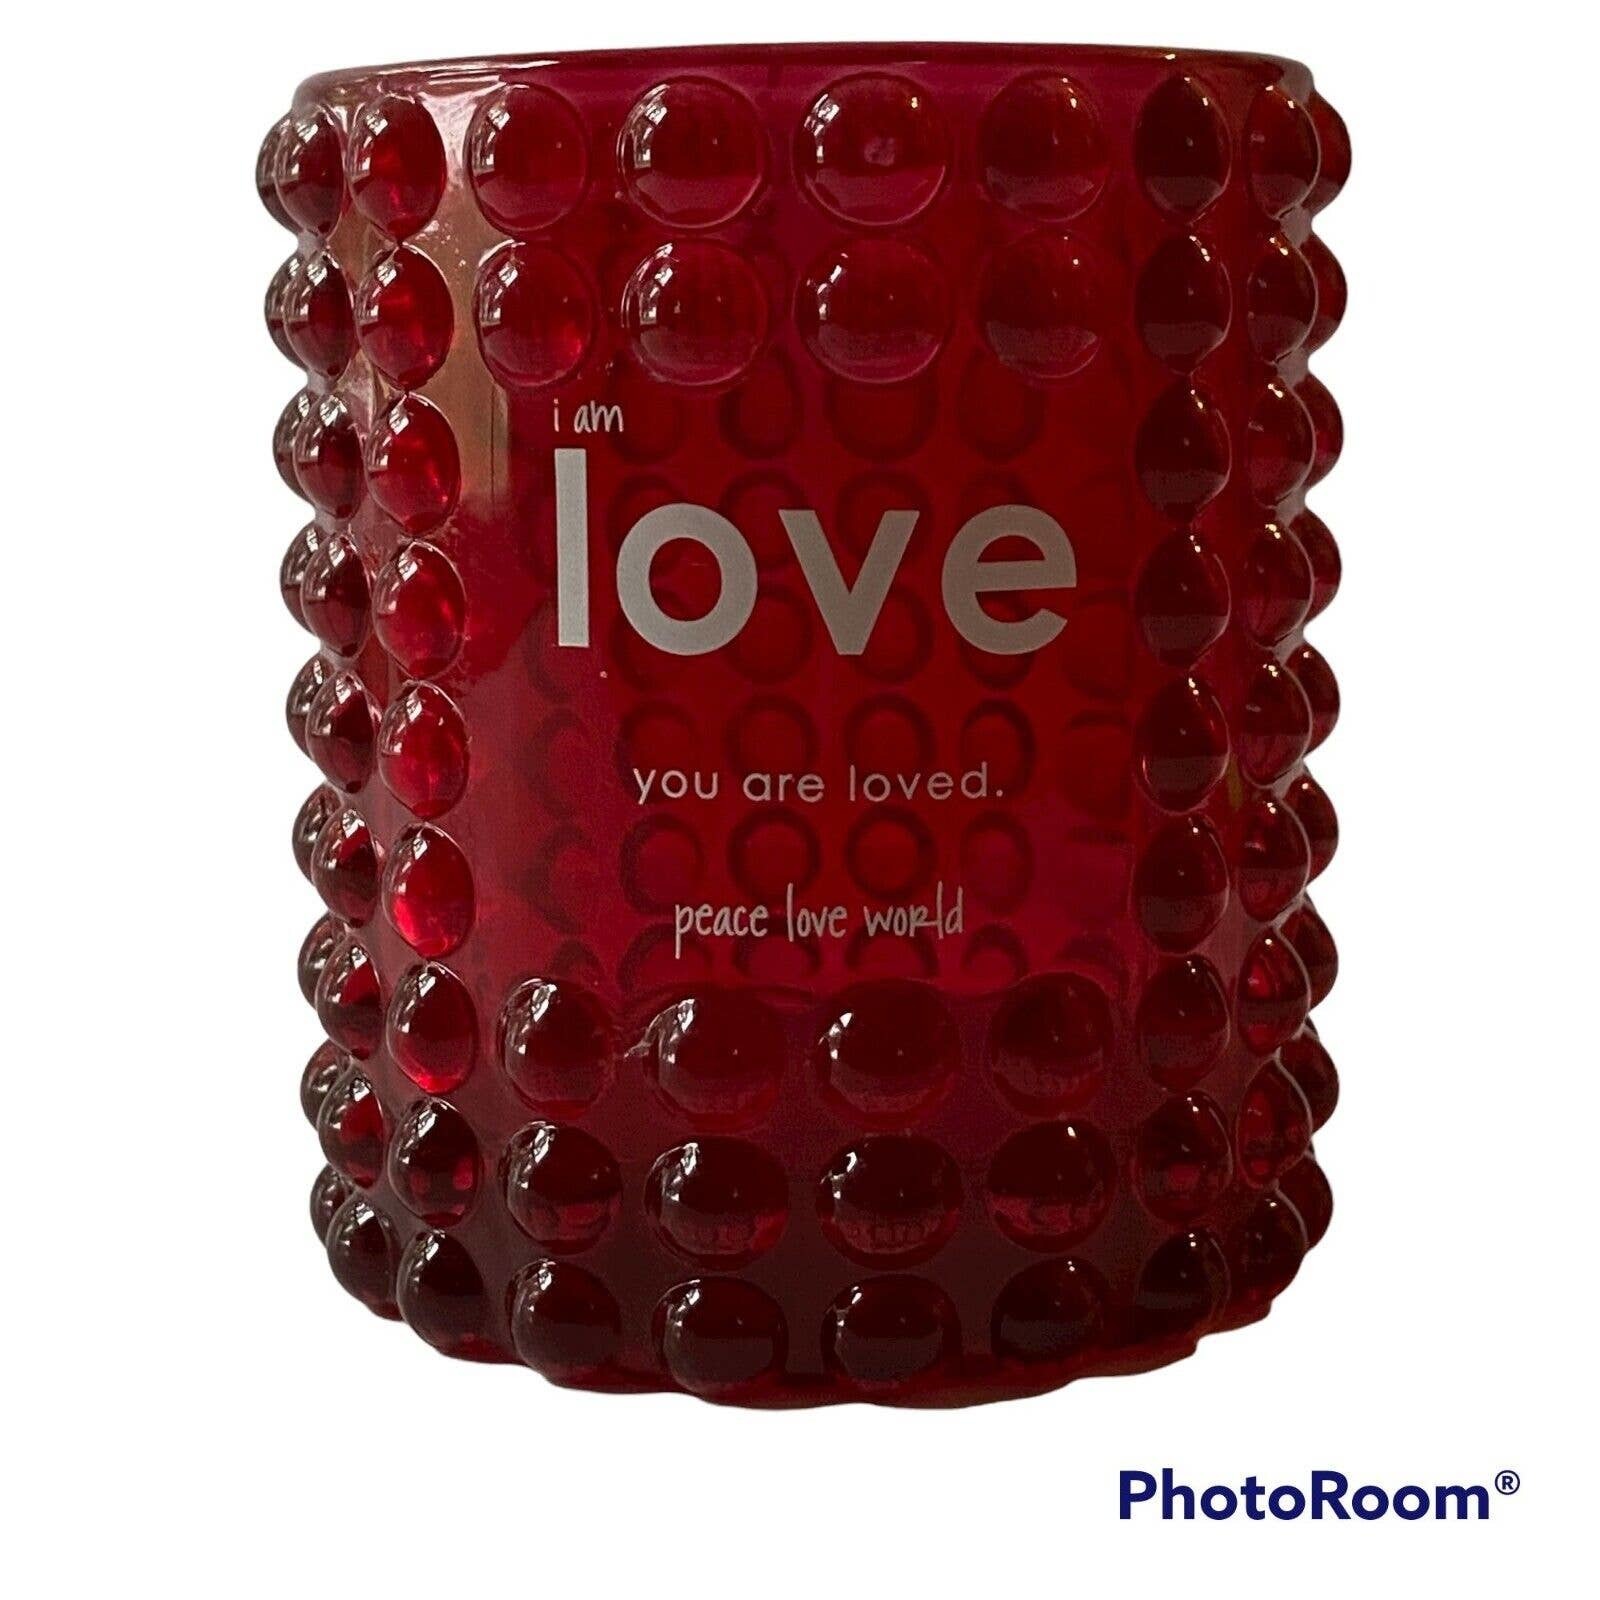 Peace Love World Candle Holder QVC Red Glass Hobnail Votive Tealight - $17.87